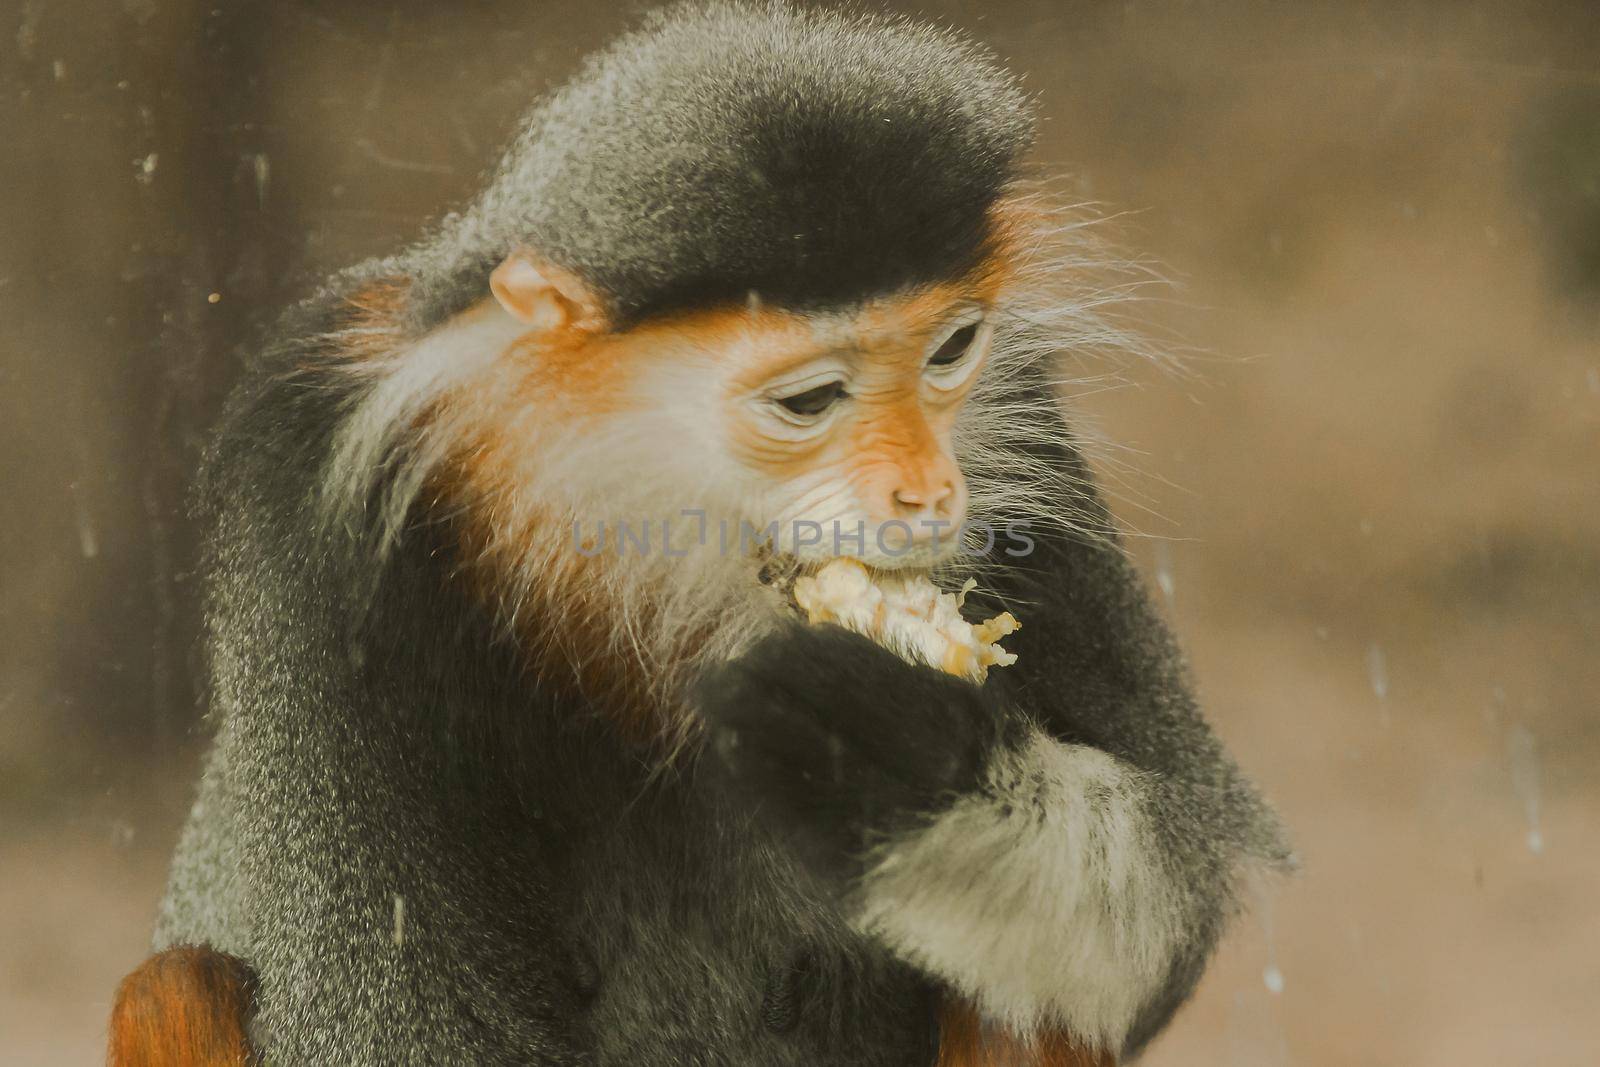 Red-shanked Douc Langur is sitting down to eat. Red-shanked Douc Langu has a very eye-catching color. It is considered the most beautiful lemurs in the world.